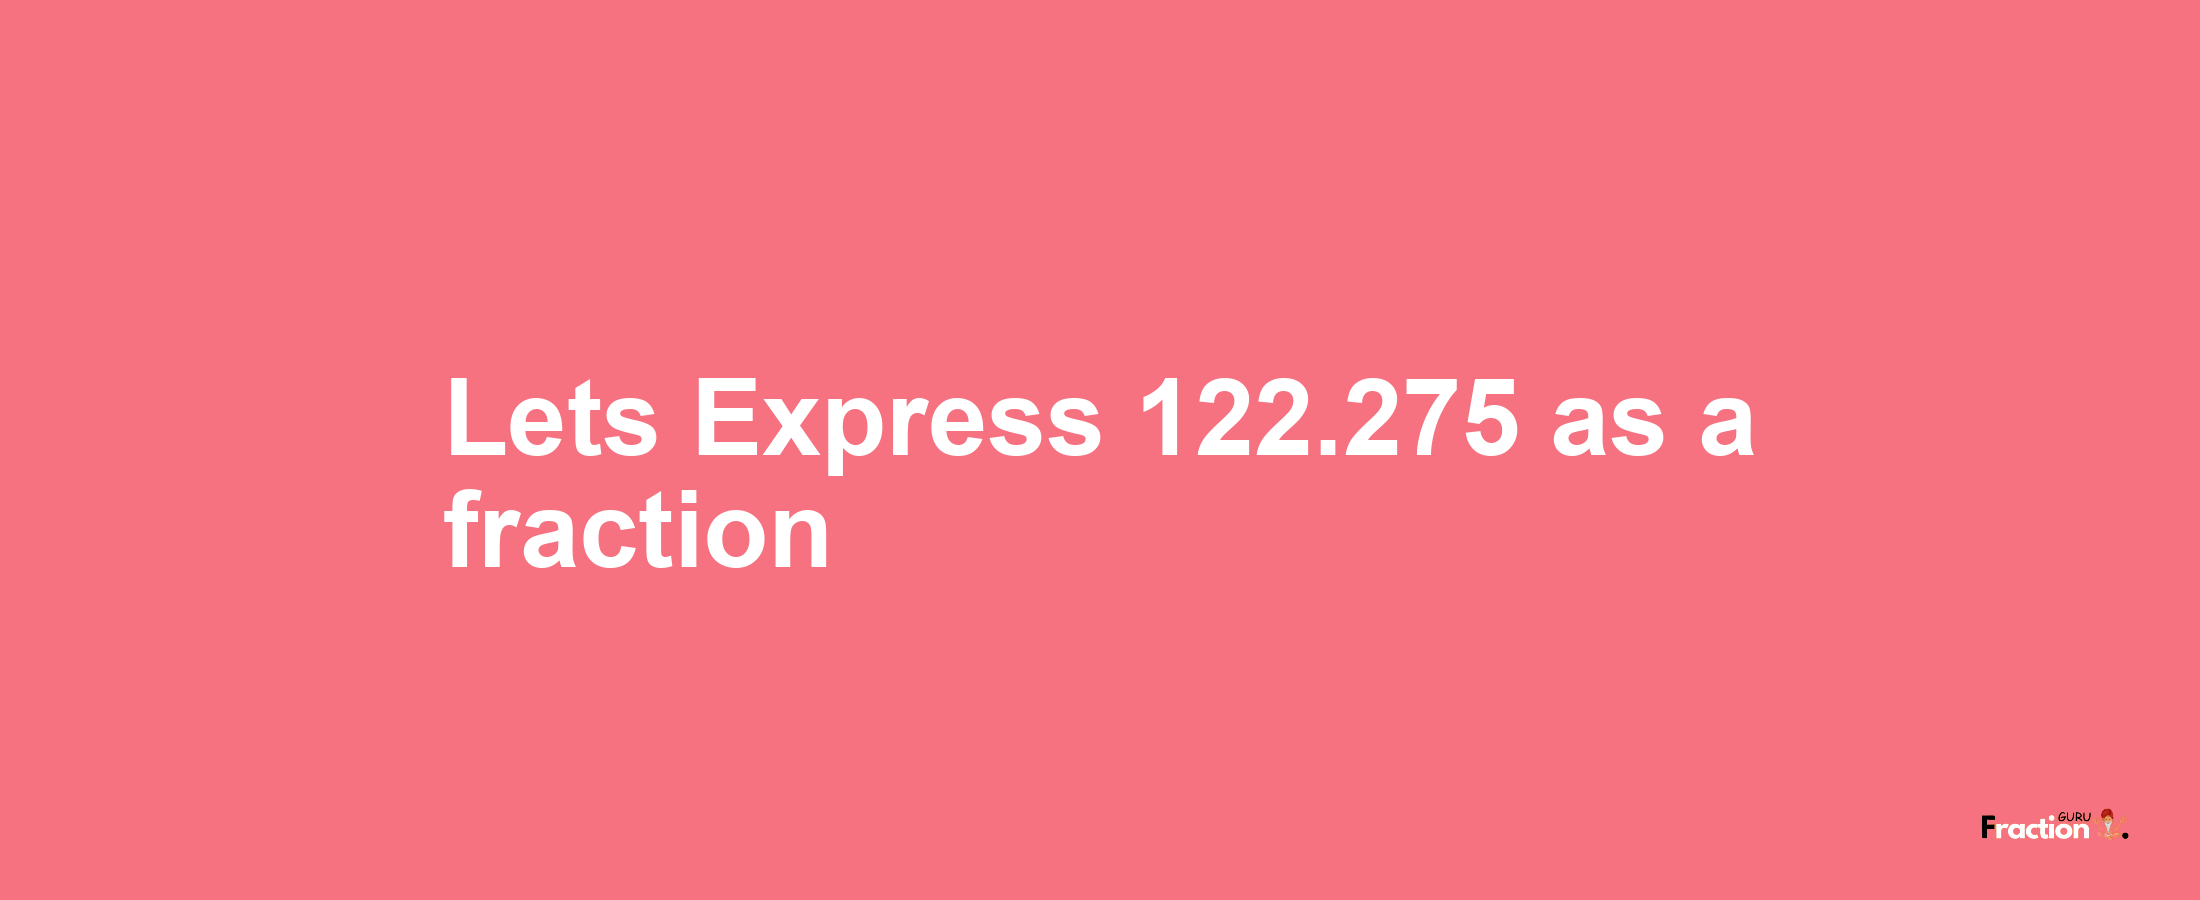 Lets Express 122.275 as afraction